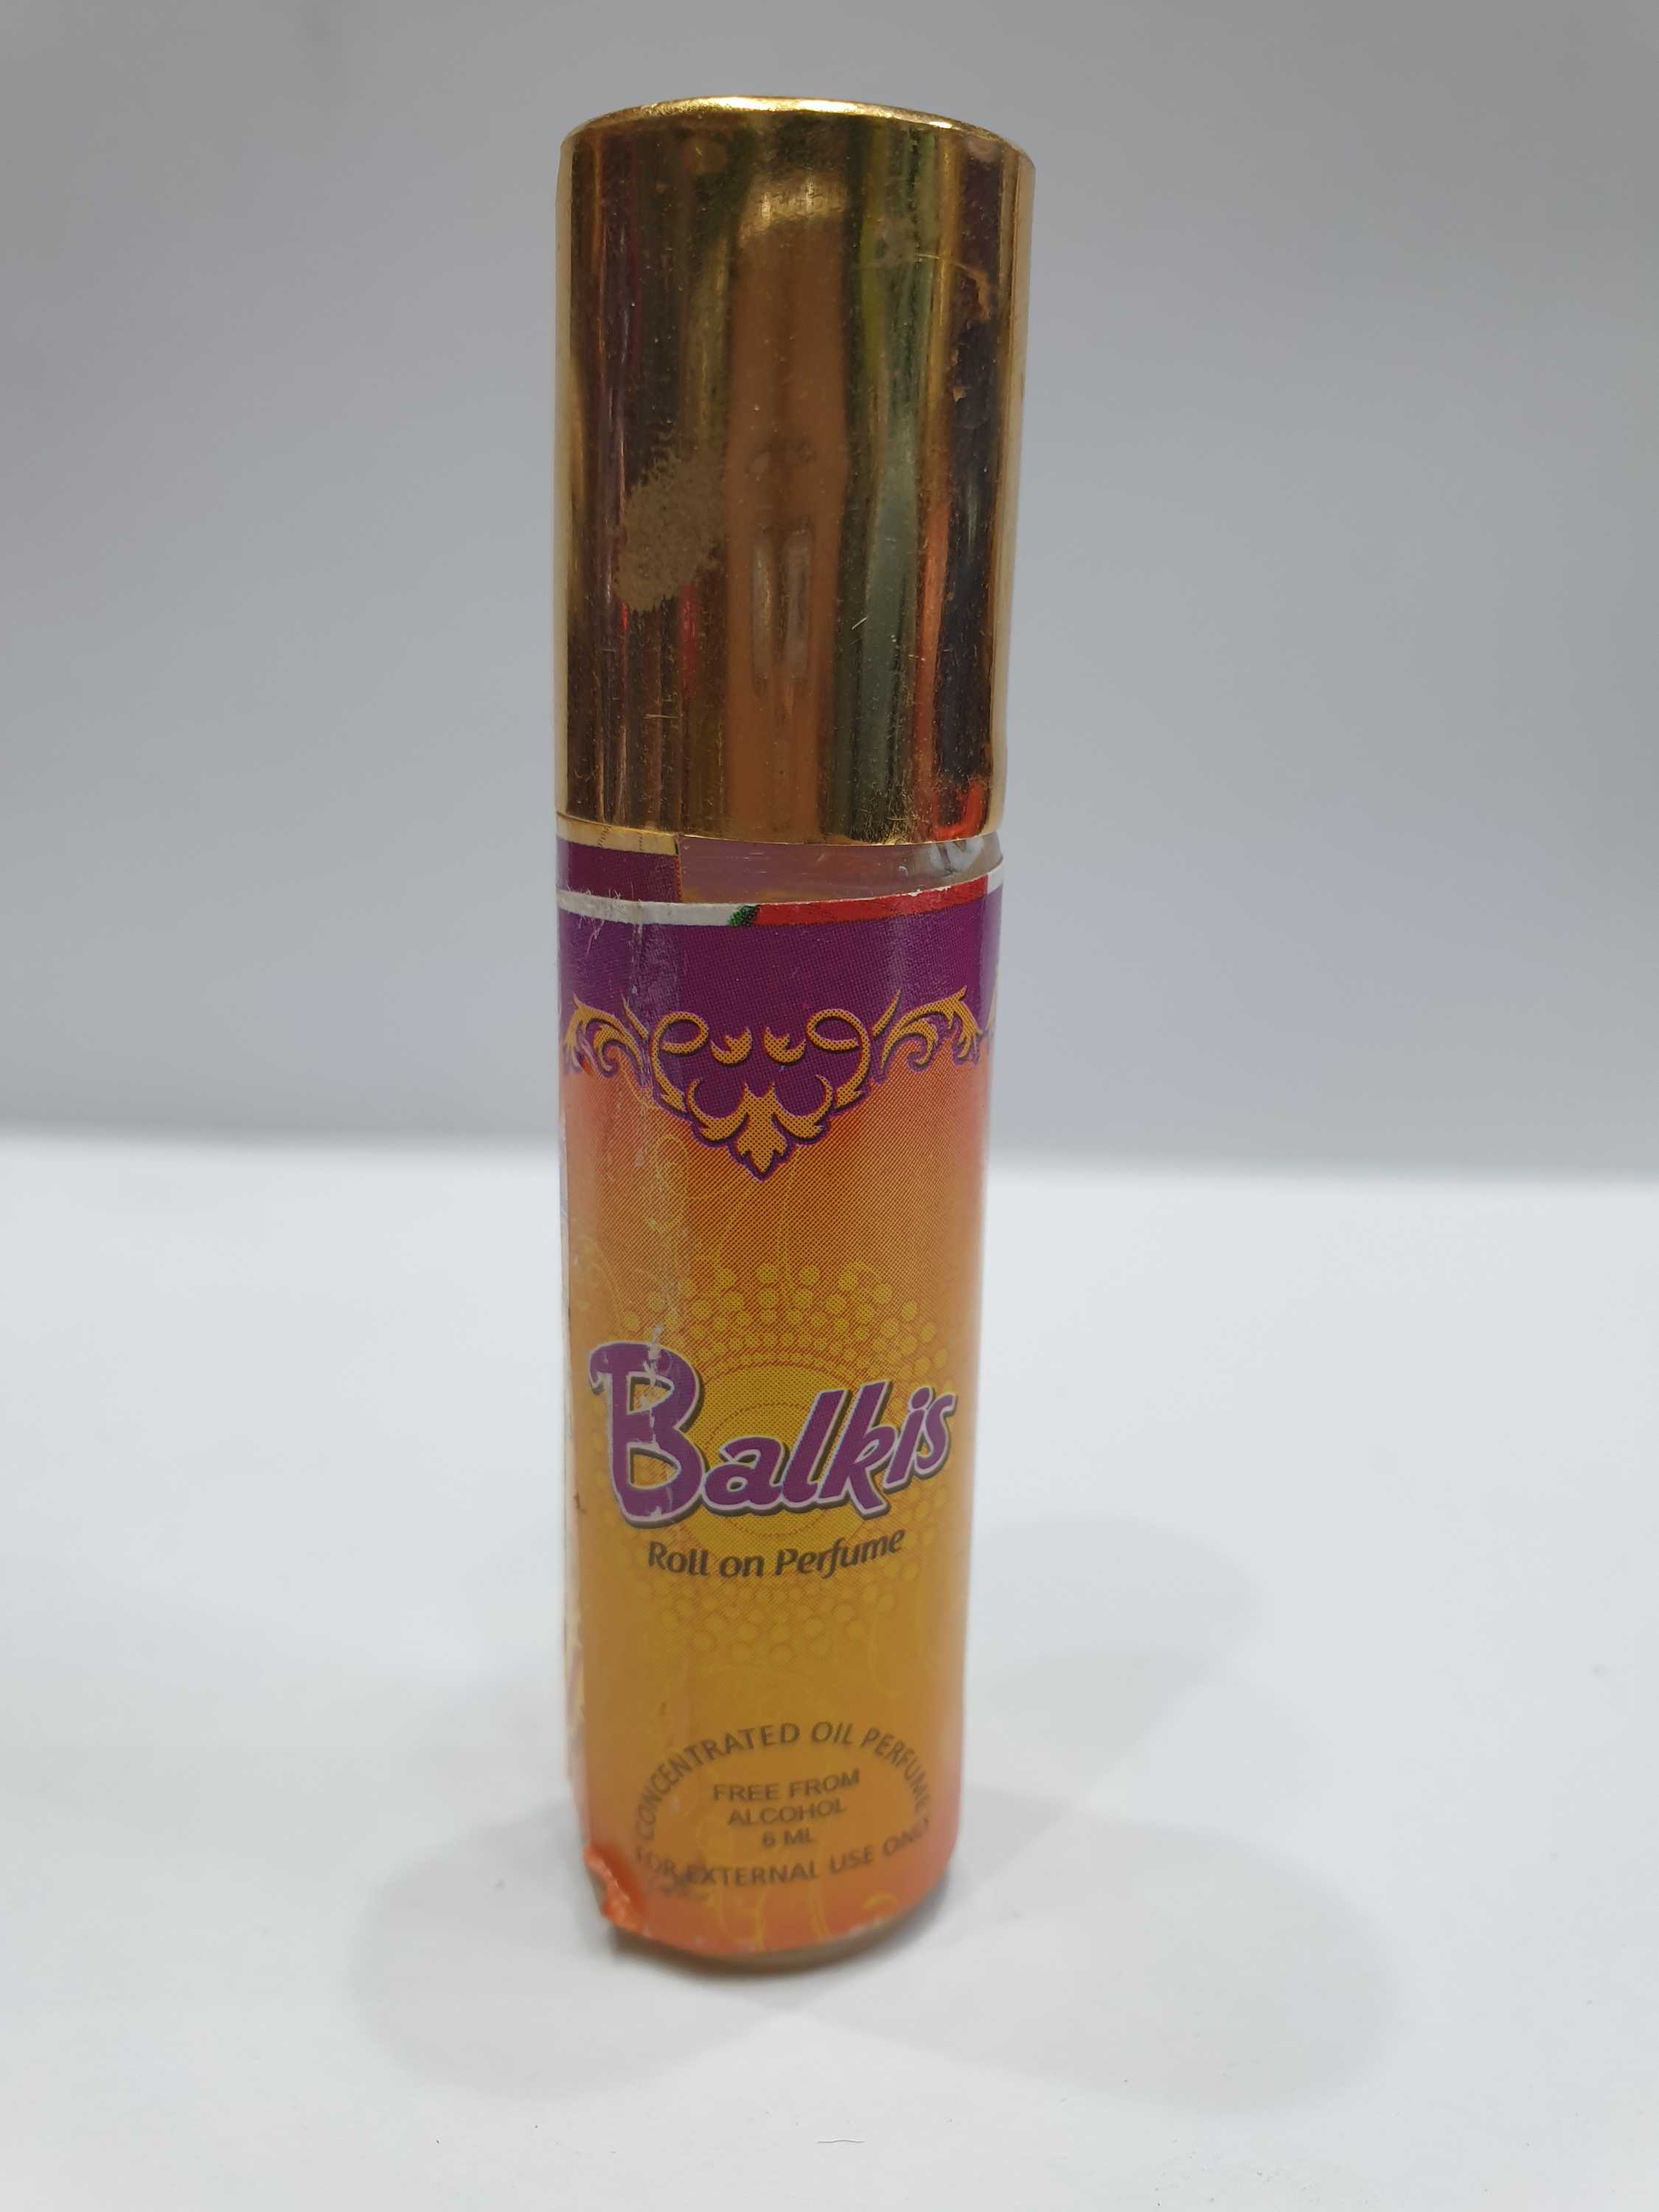 Attar - Handmade Natural Perfume Form Herbal Extract, balkis, 6ml, roll On